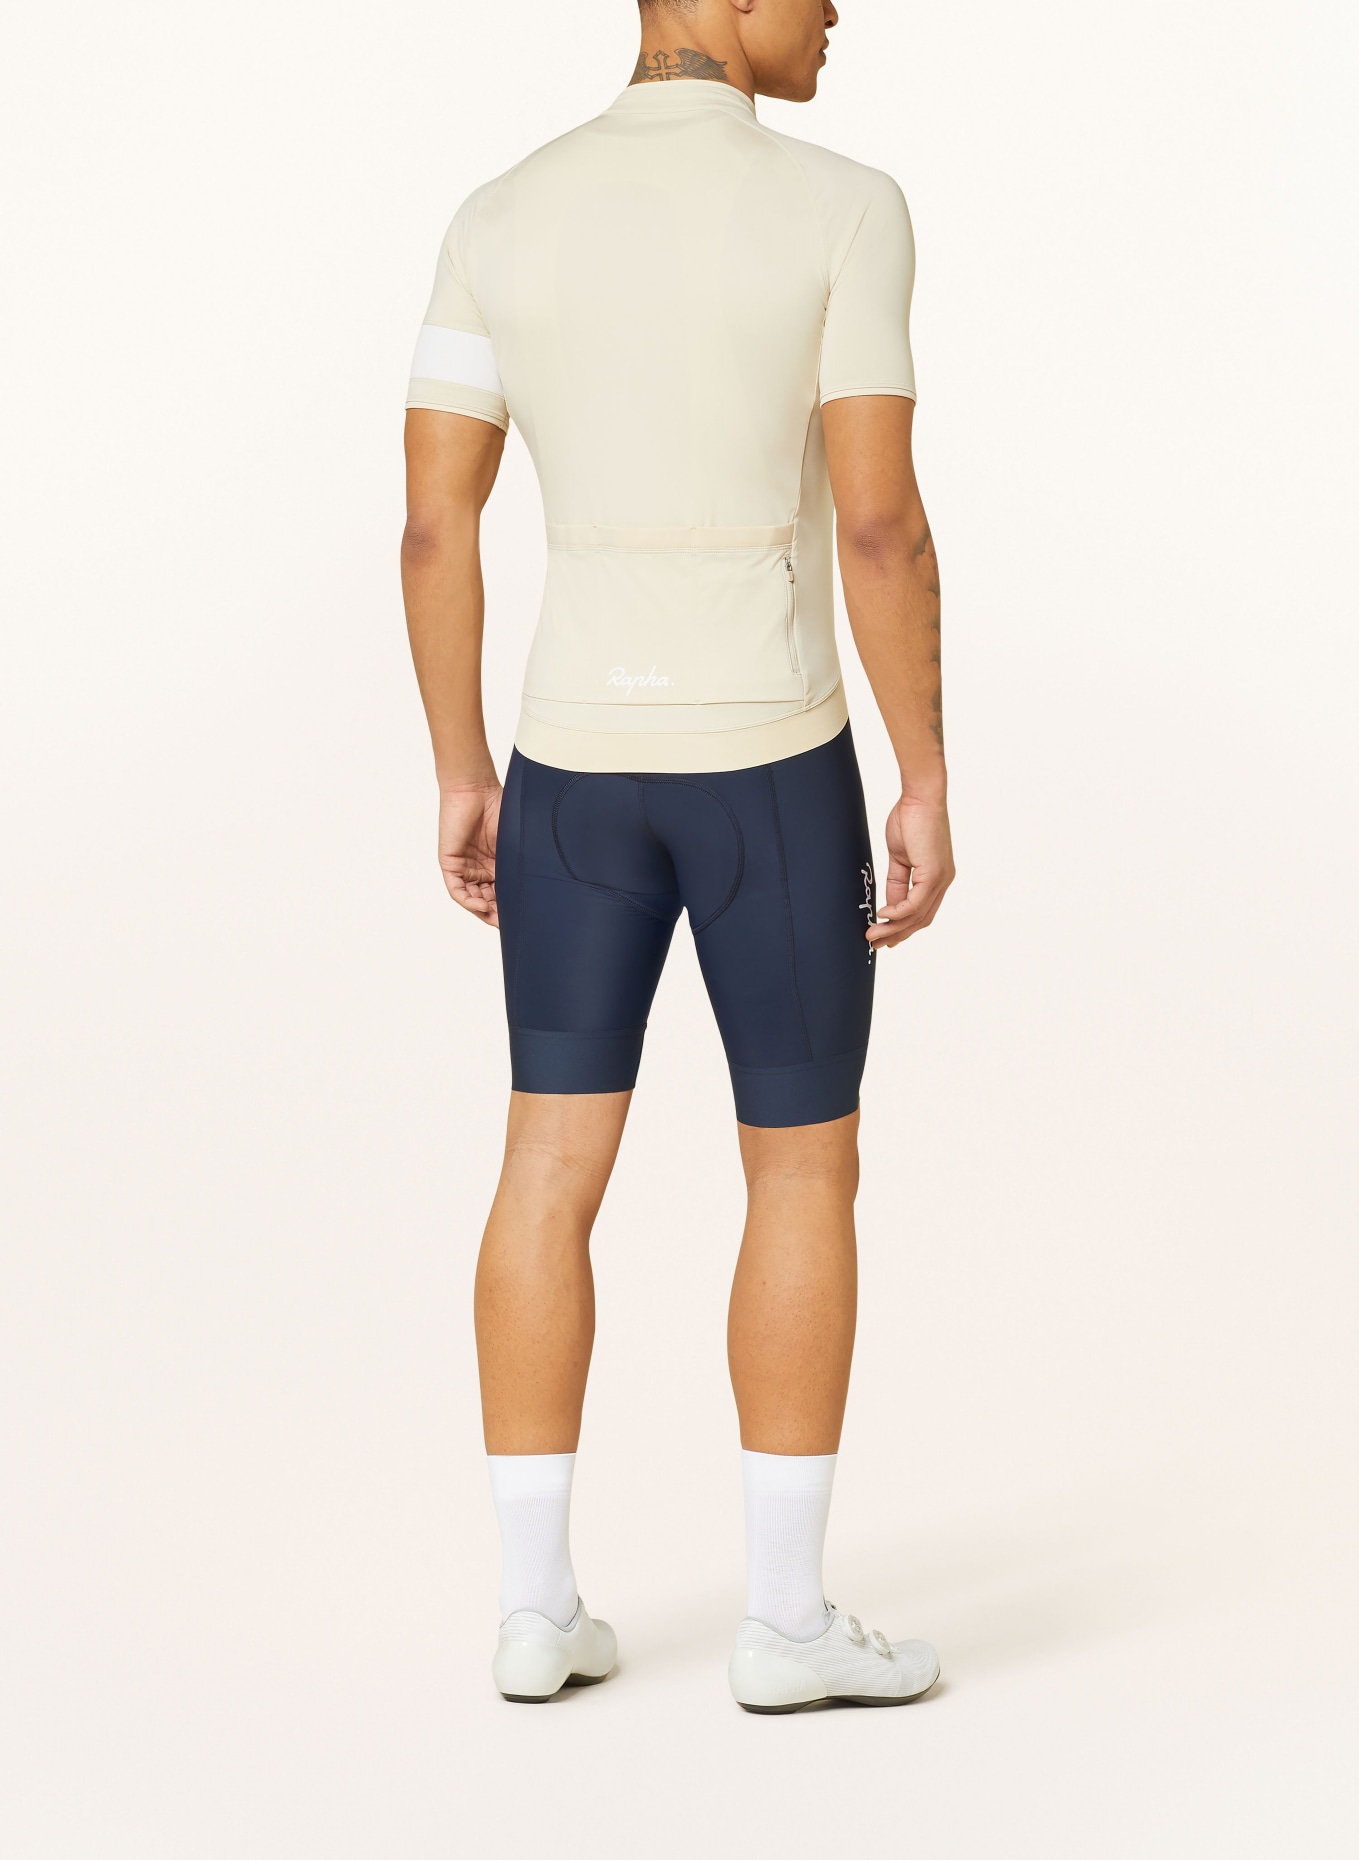 Rapha Cycling jersey CORE, Color: BEIGE (Image 3)